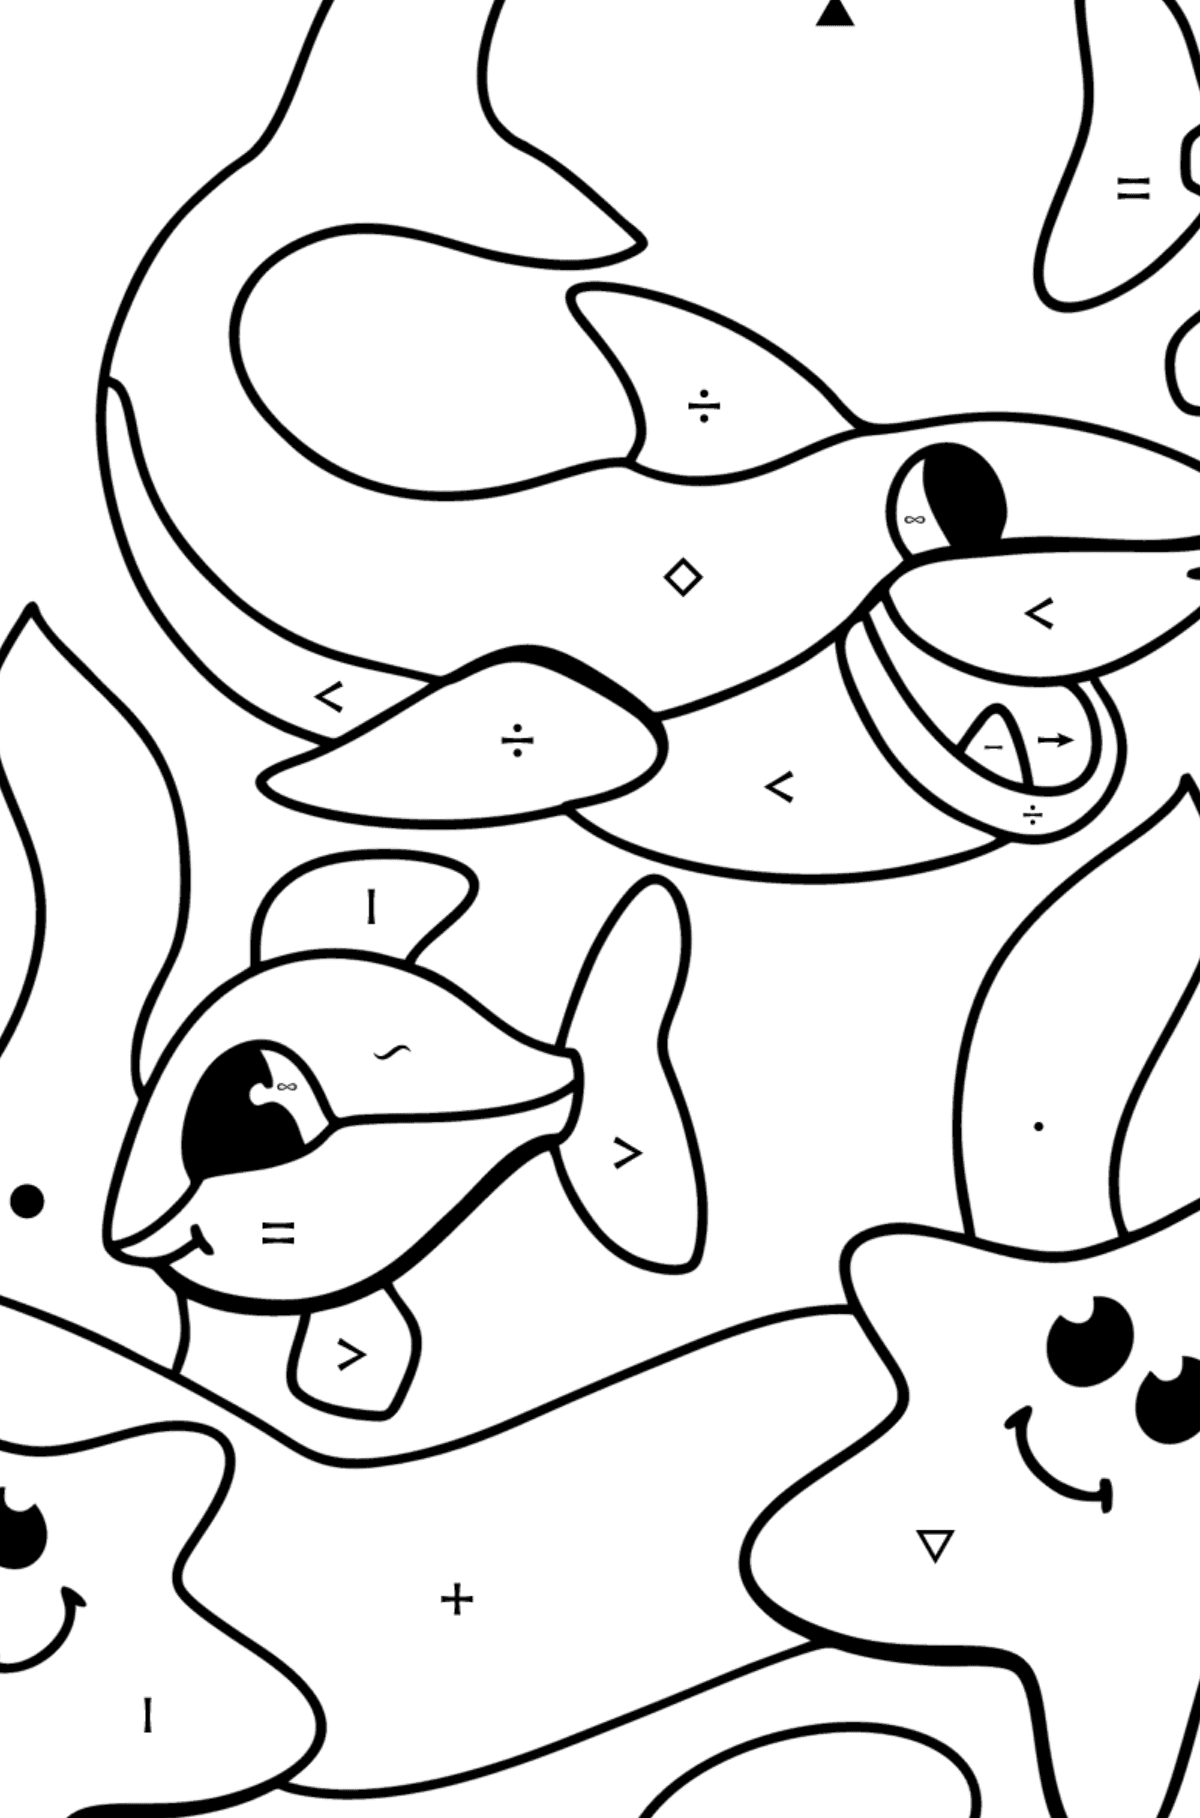 Cute shark coloring page - Coloring by Symbols for Kids